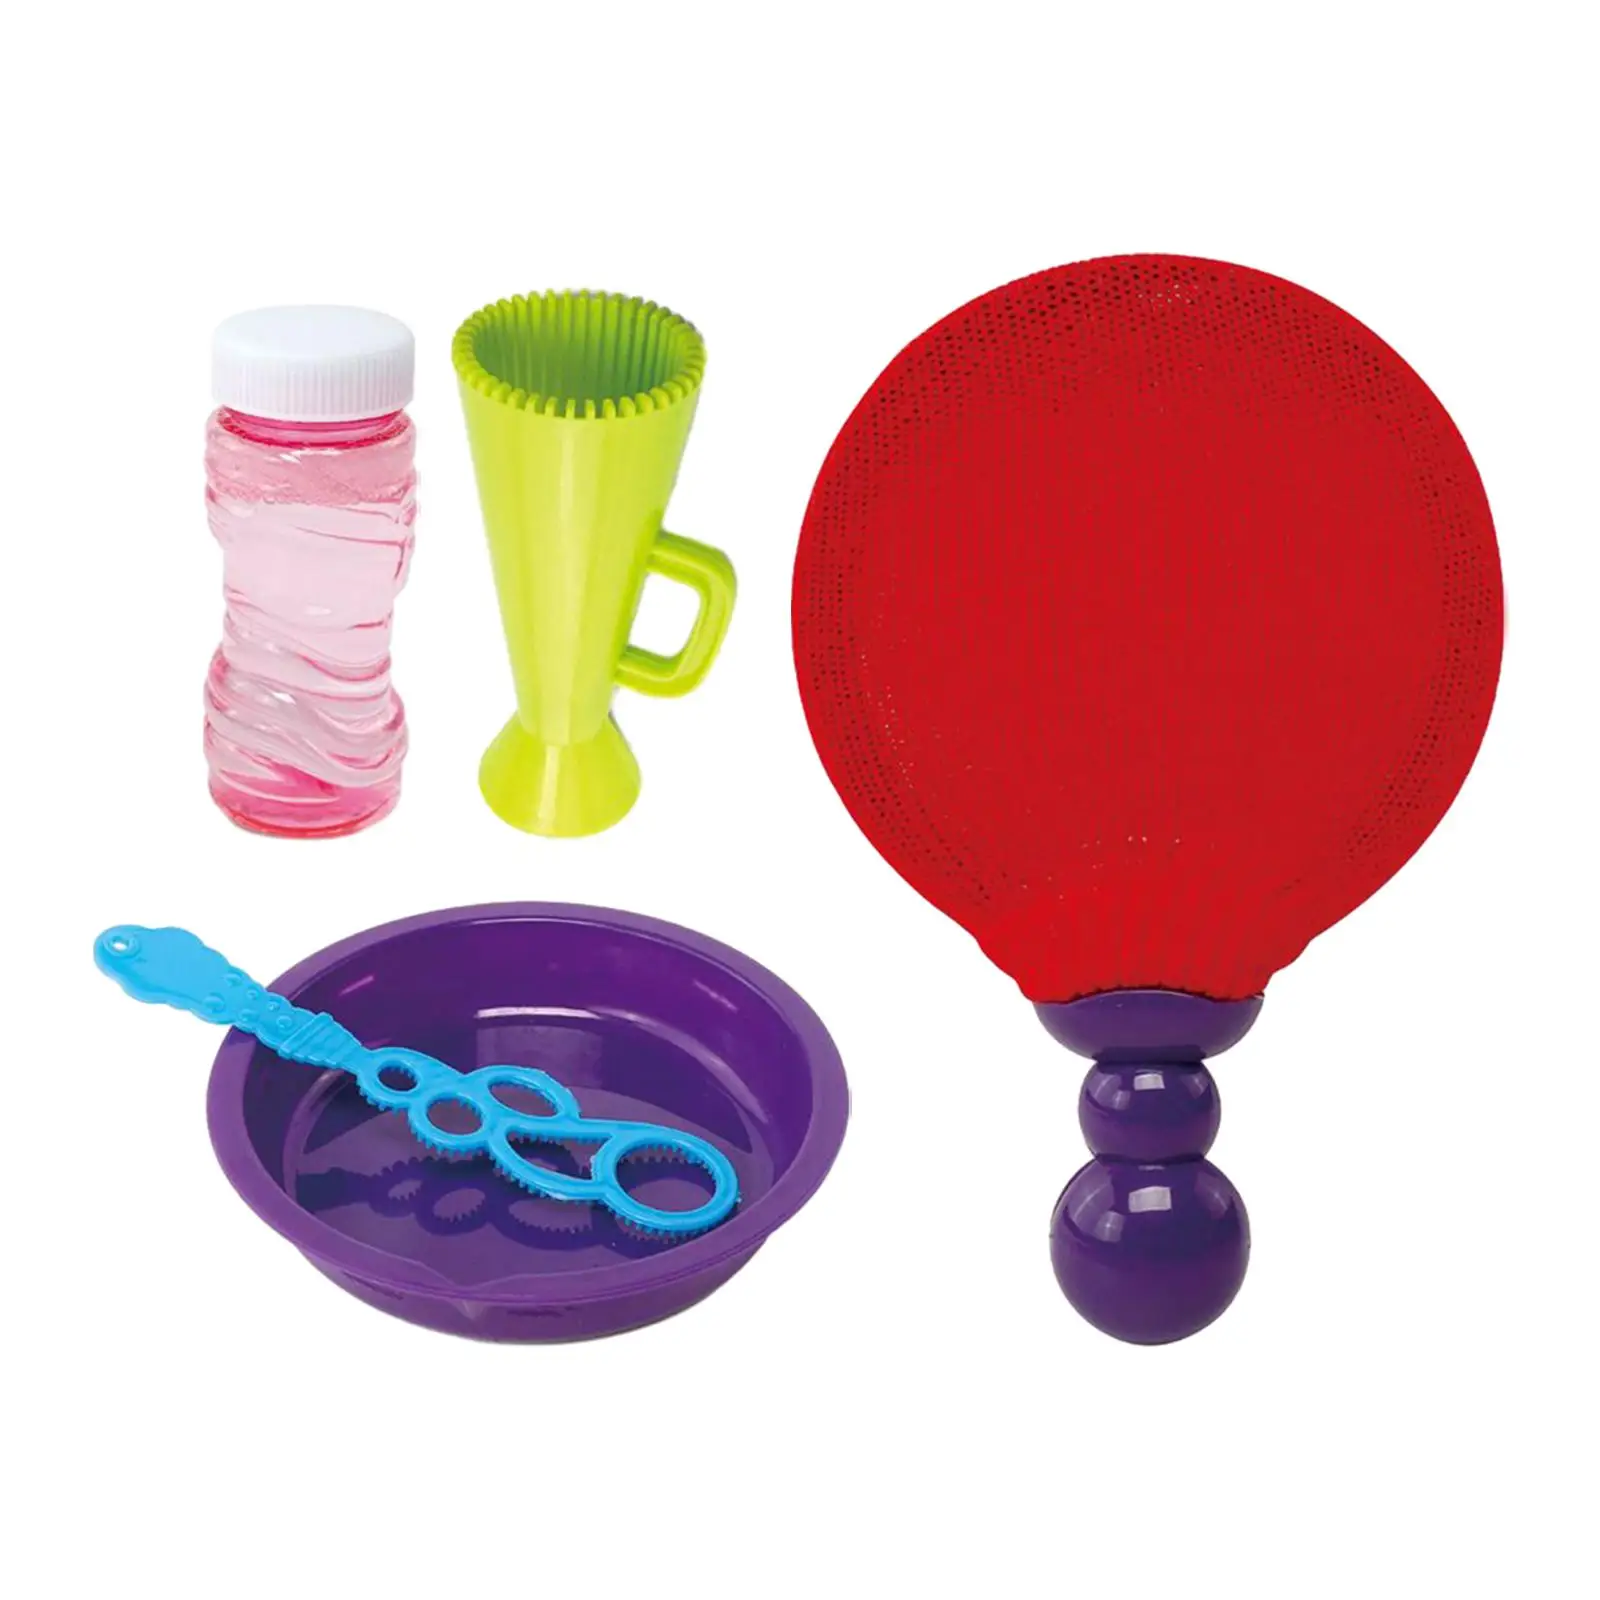 Toss and Catch Bubble Game Table Tennis Catching Bubble Game and Fun for Adult Family Playground Activities Lawn